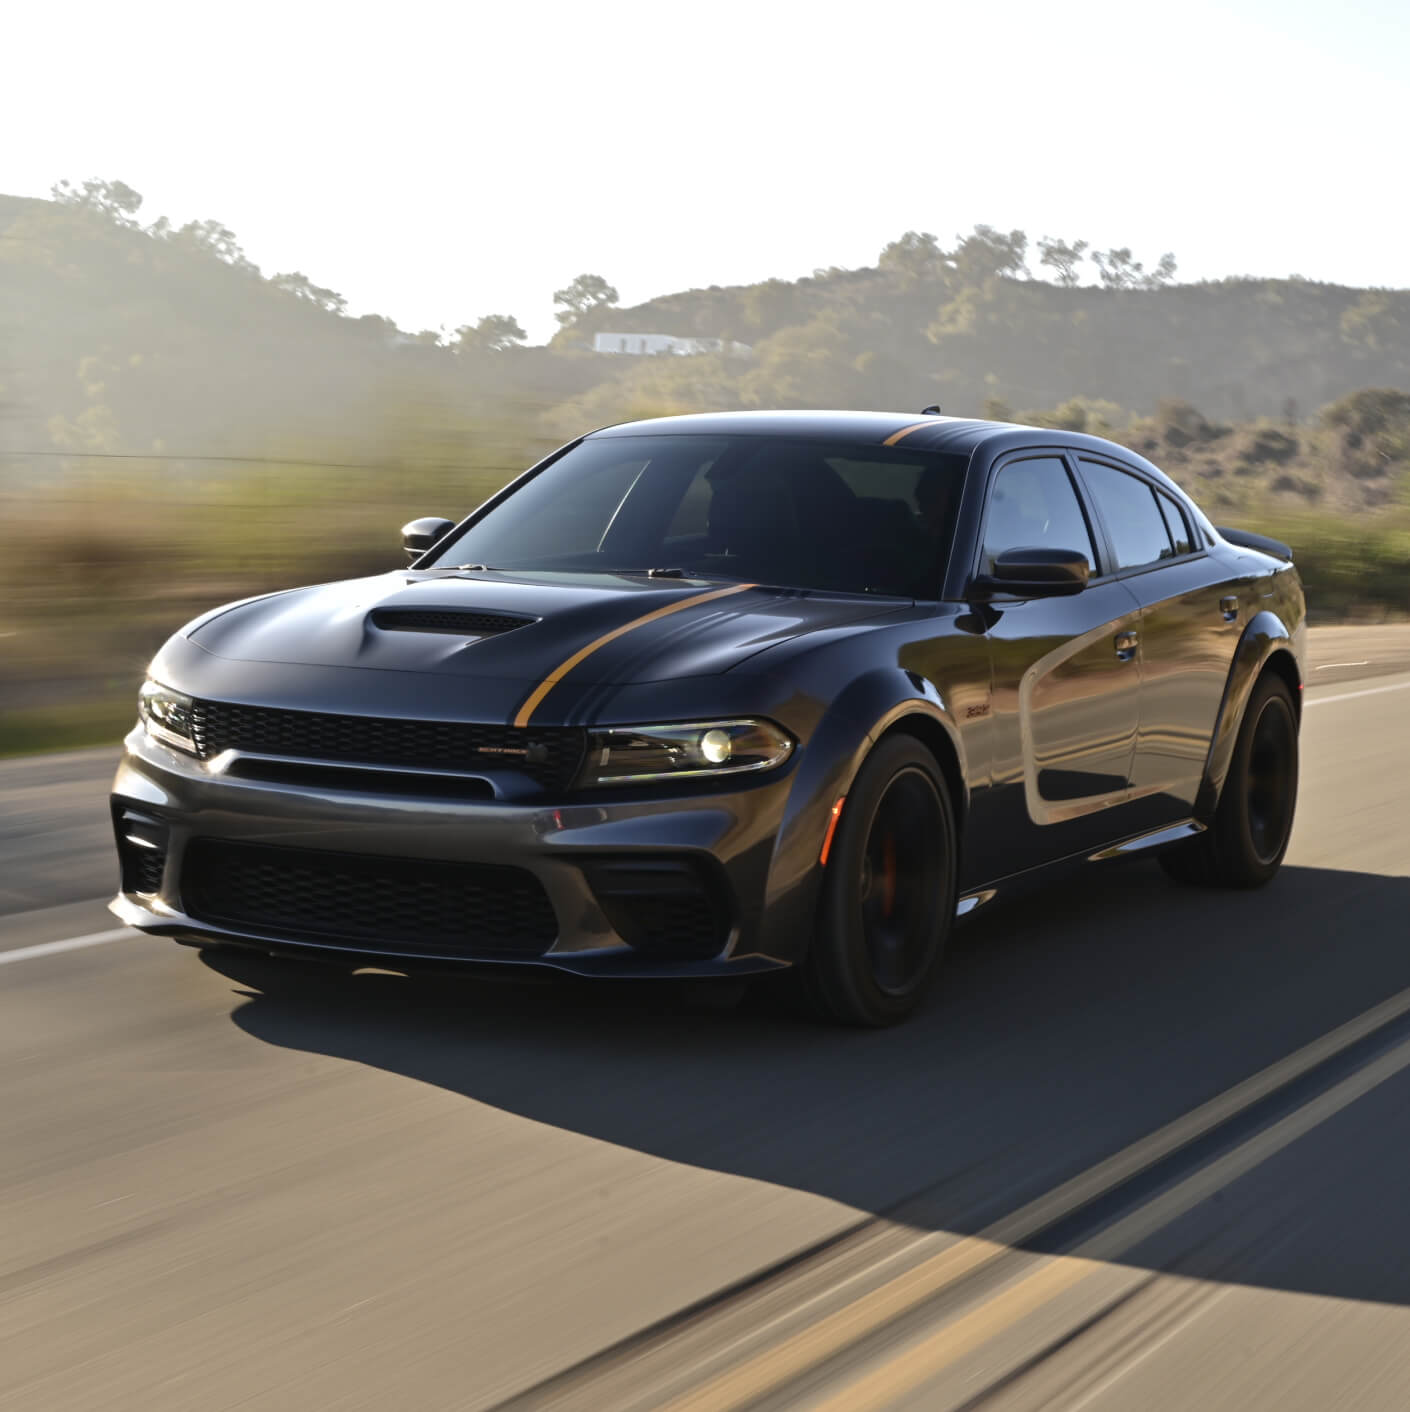 Dodge Charger Specs & Performance